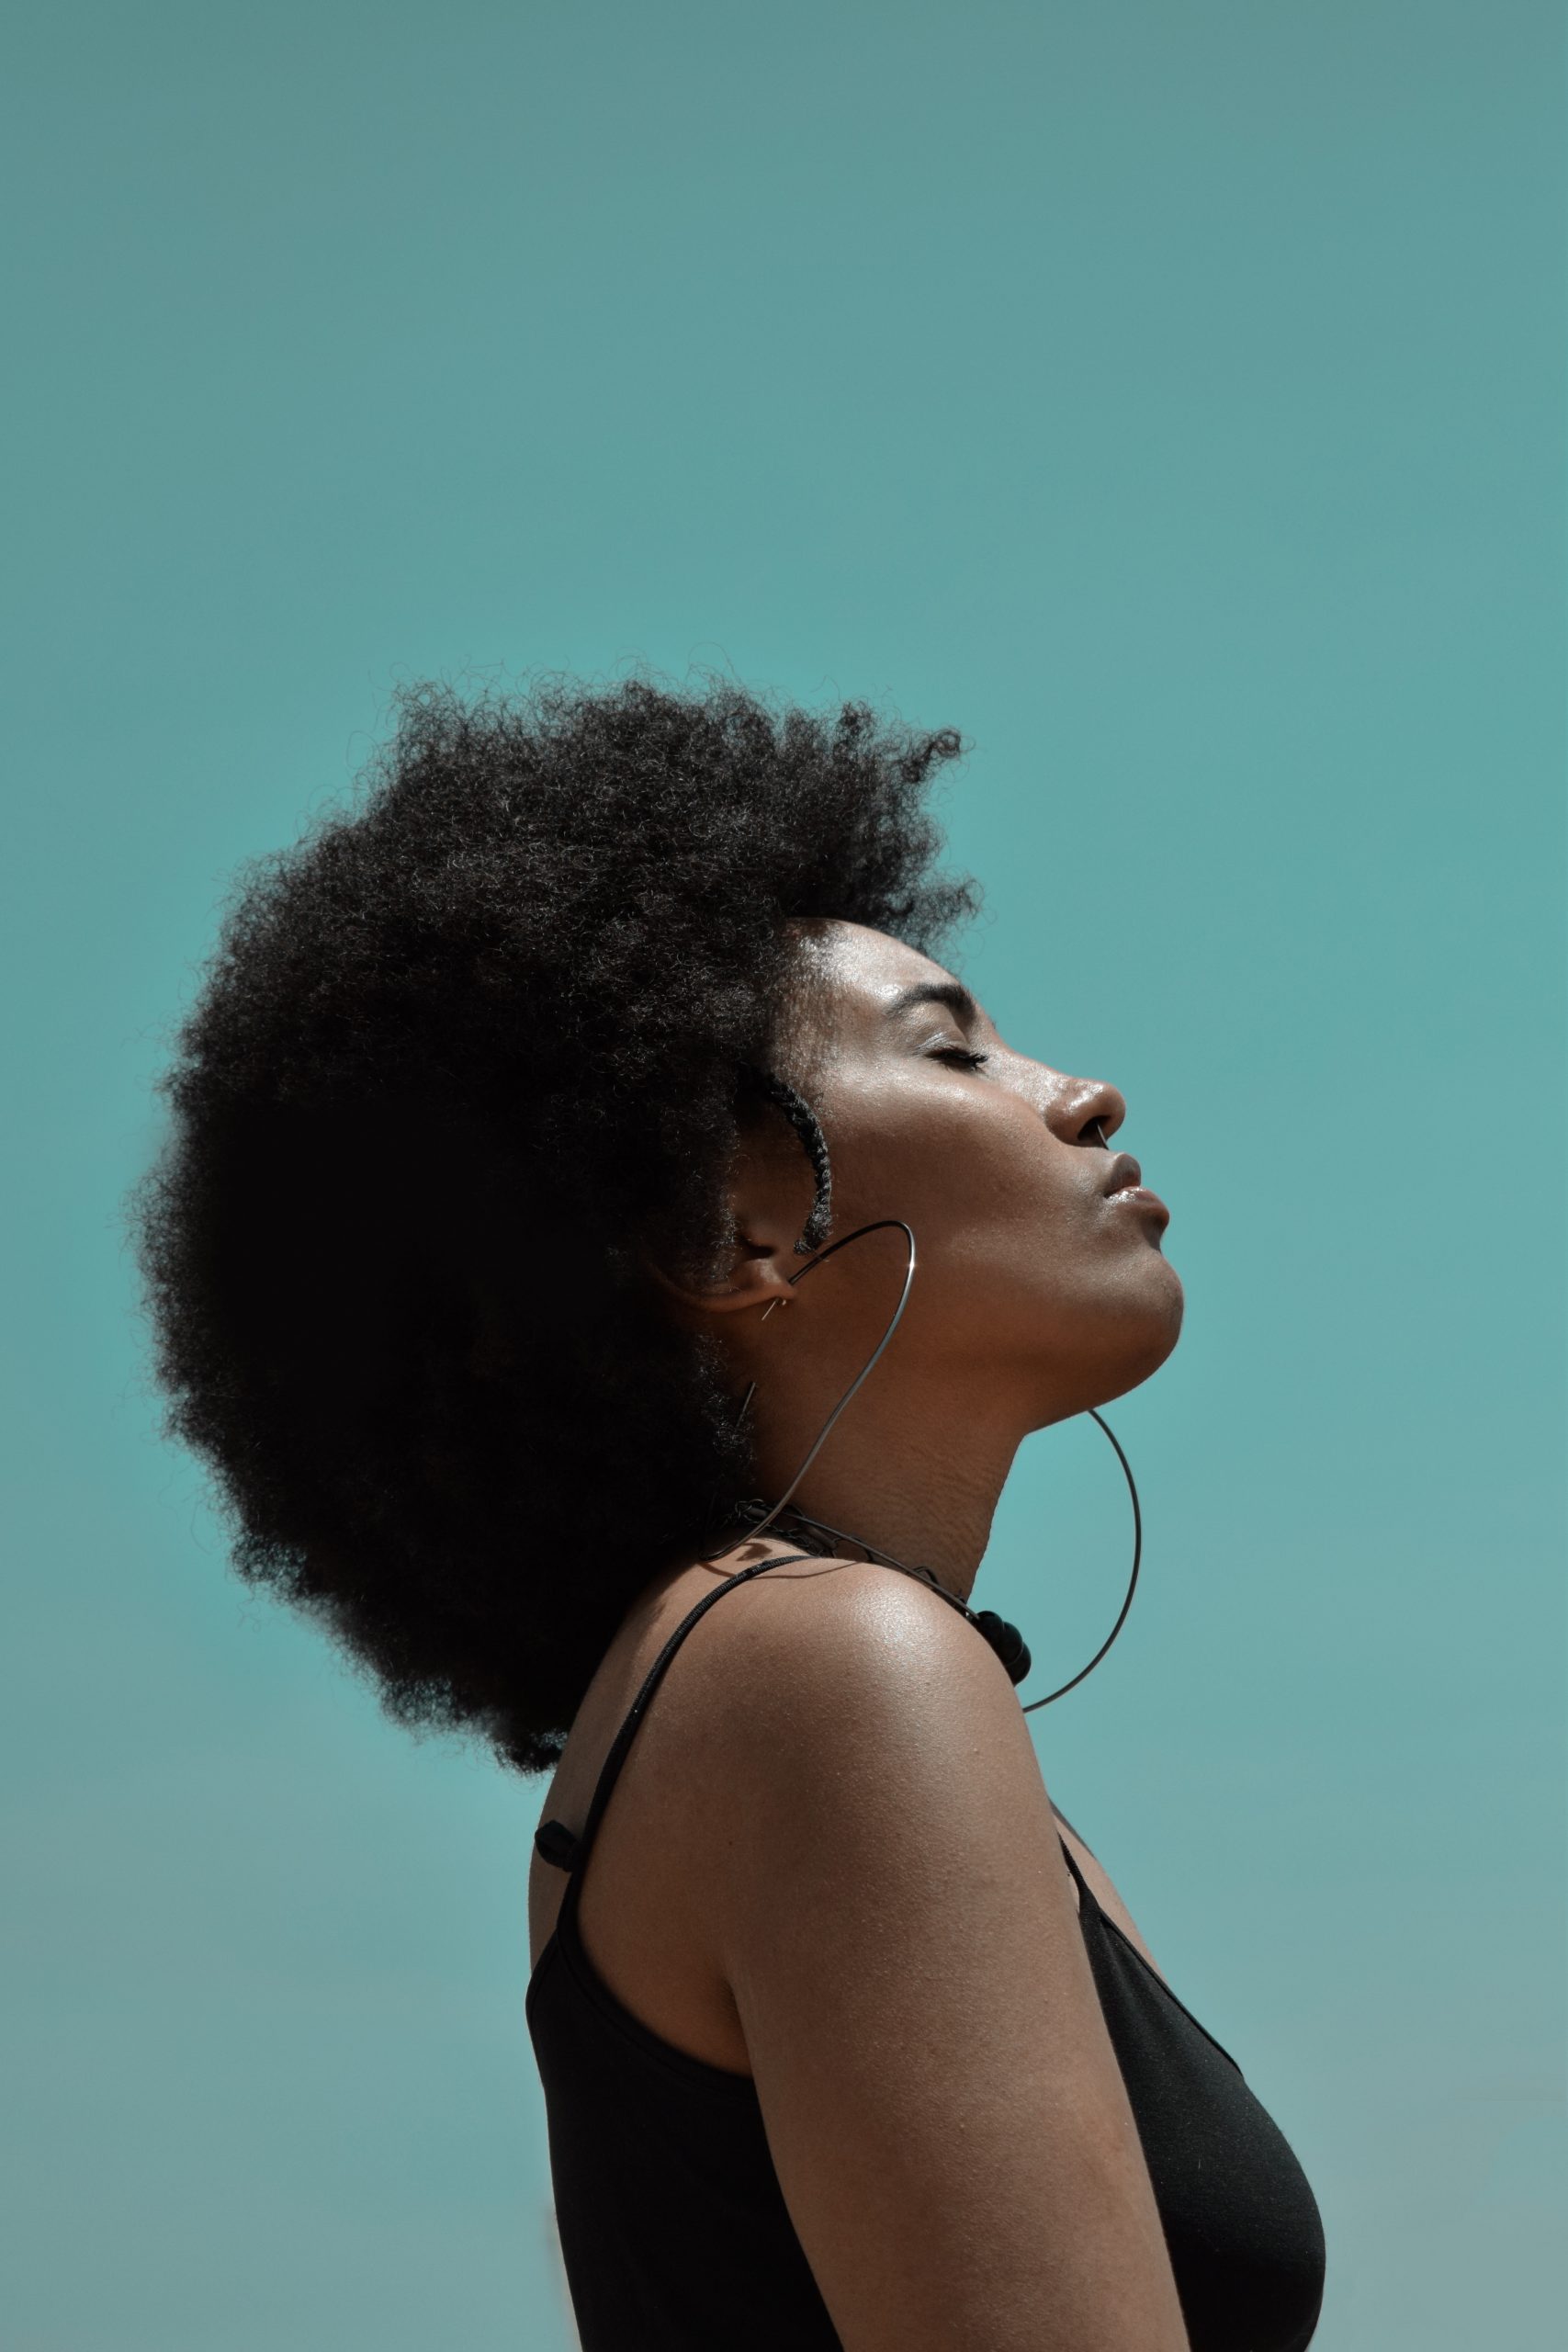 A Black woman with afro hair looks towards the sun with her eyes closed. It is a profile shot from the side showing her arm, shoulder and head.